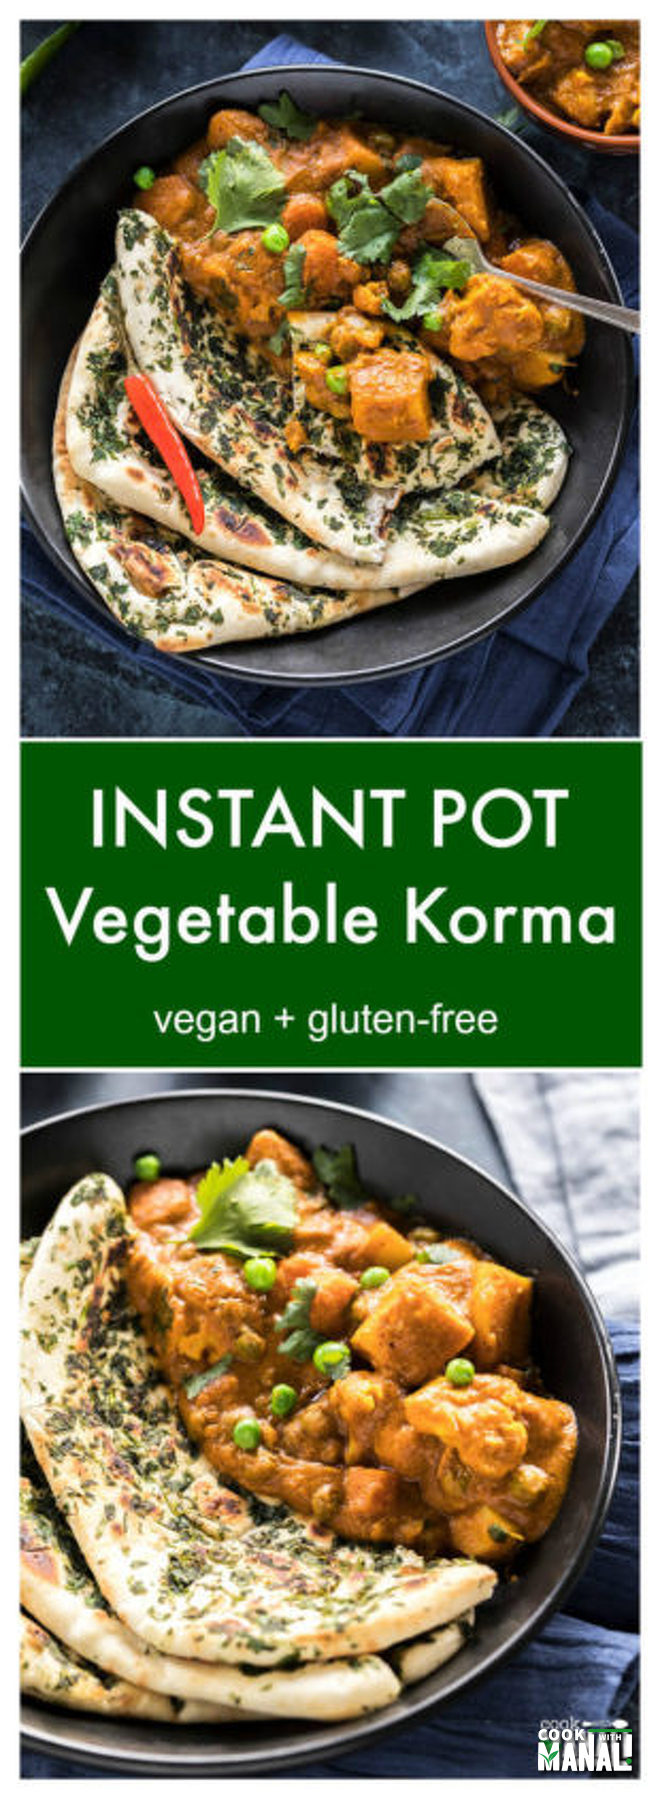 Instant Pot Vegetable Korma - Cook With Manali